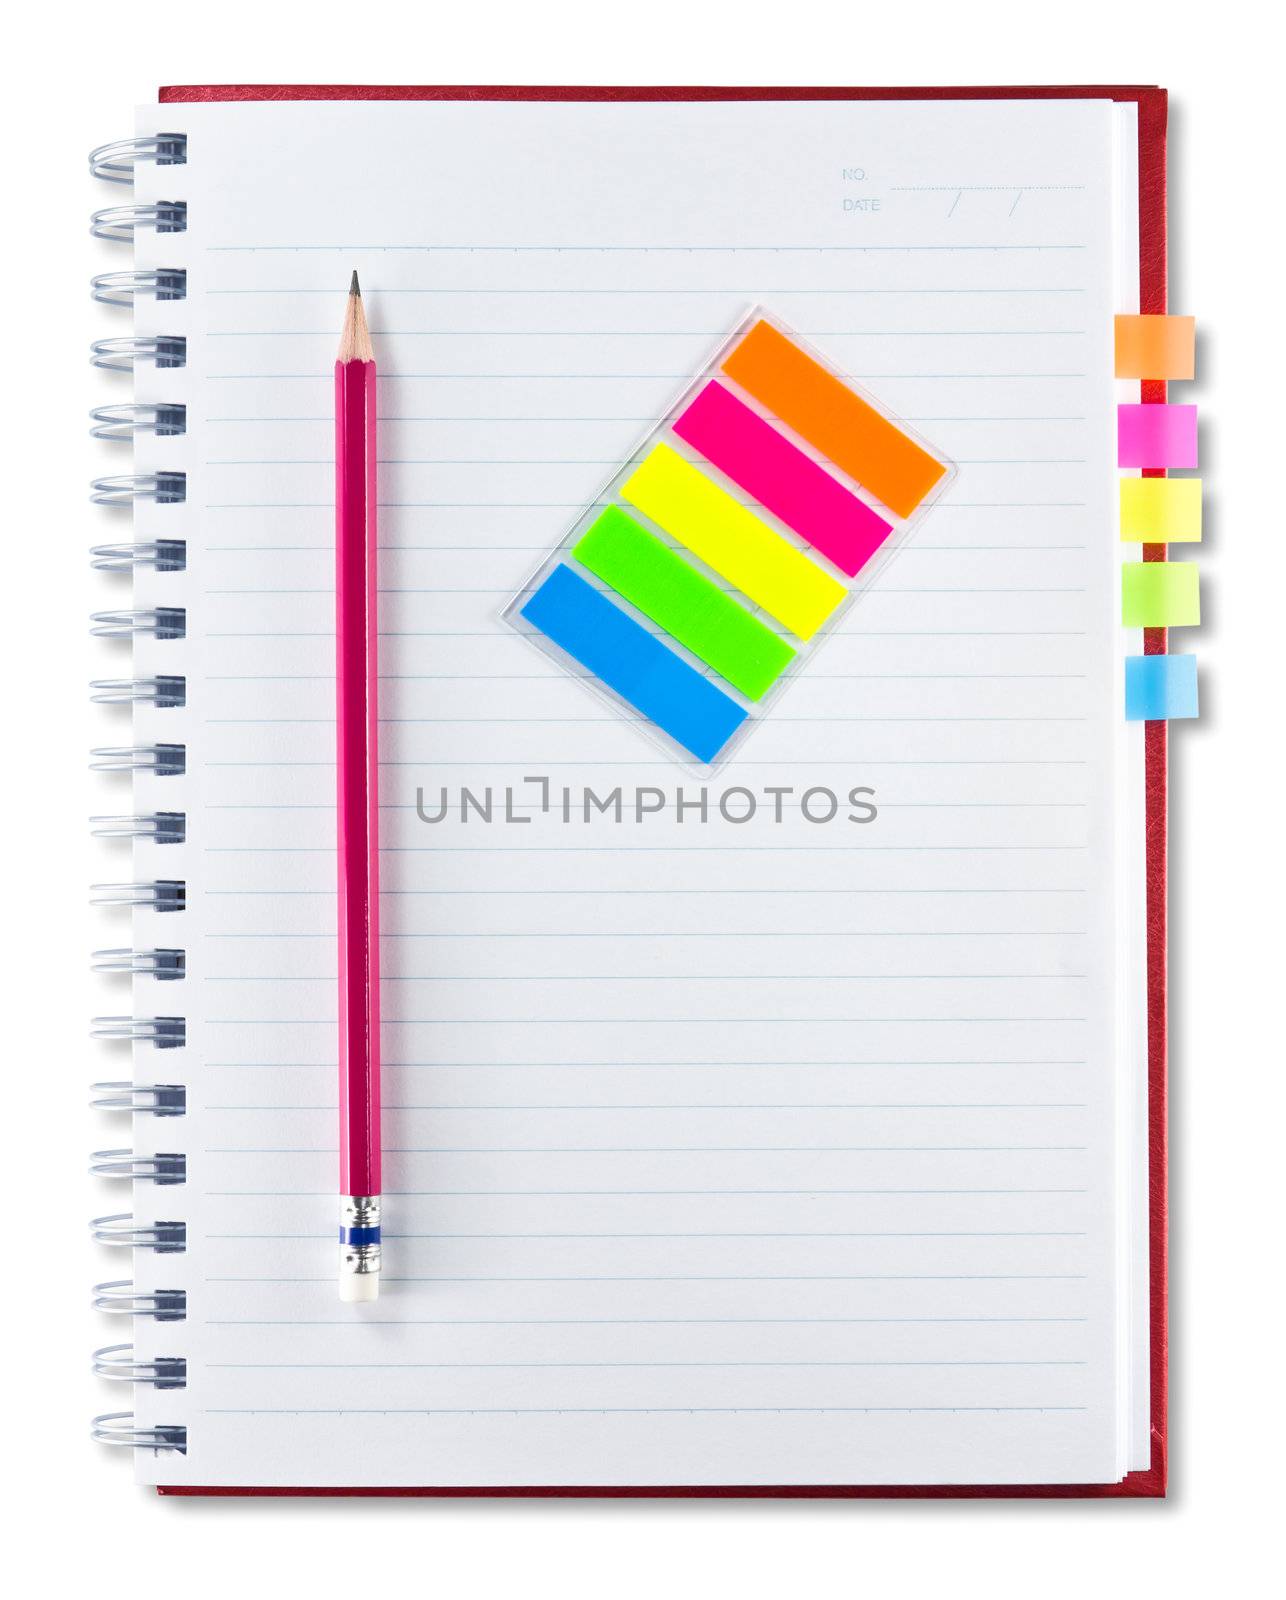 red notebook , pencil and set of indexing  by tungphoto